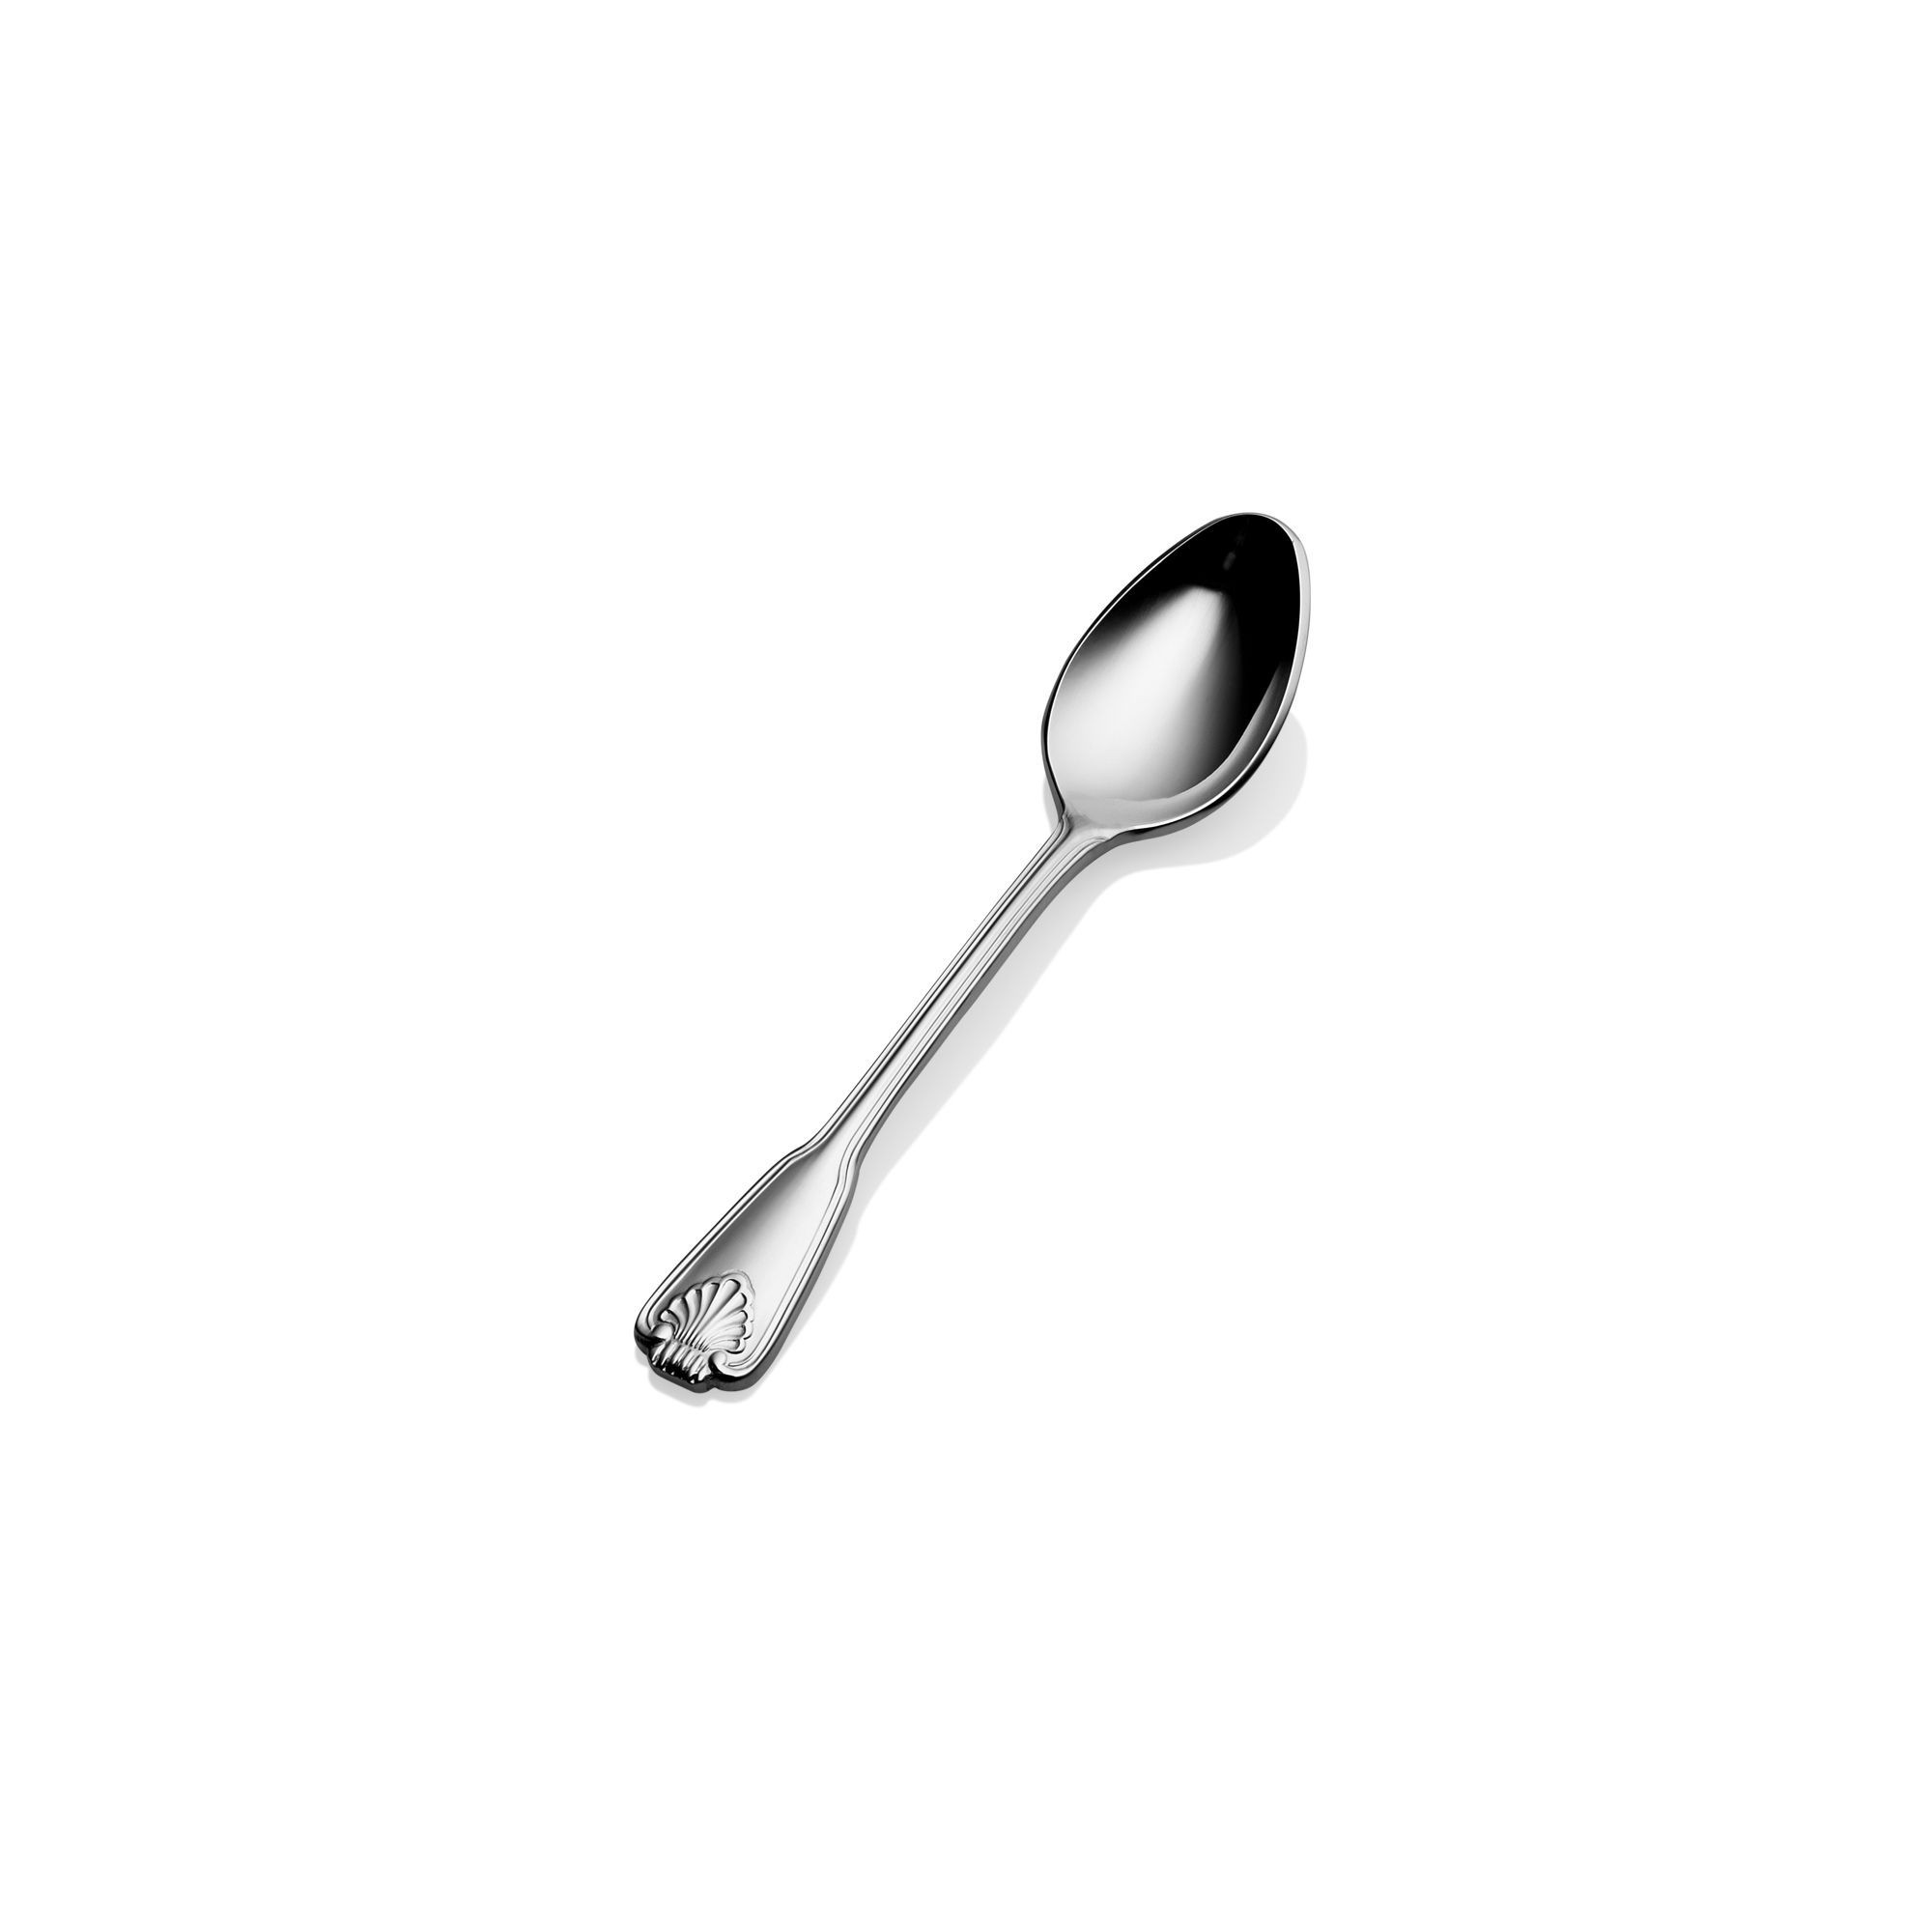 Bon Chef S2016S Shell 18/8 Stainless Steel Silverplated Demitasse Spoon